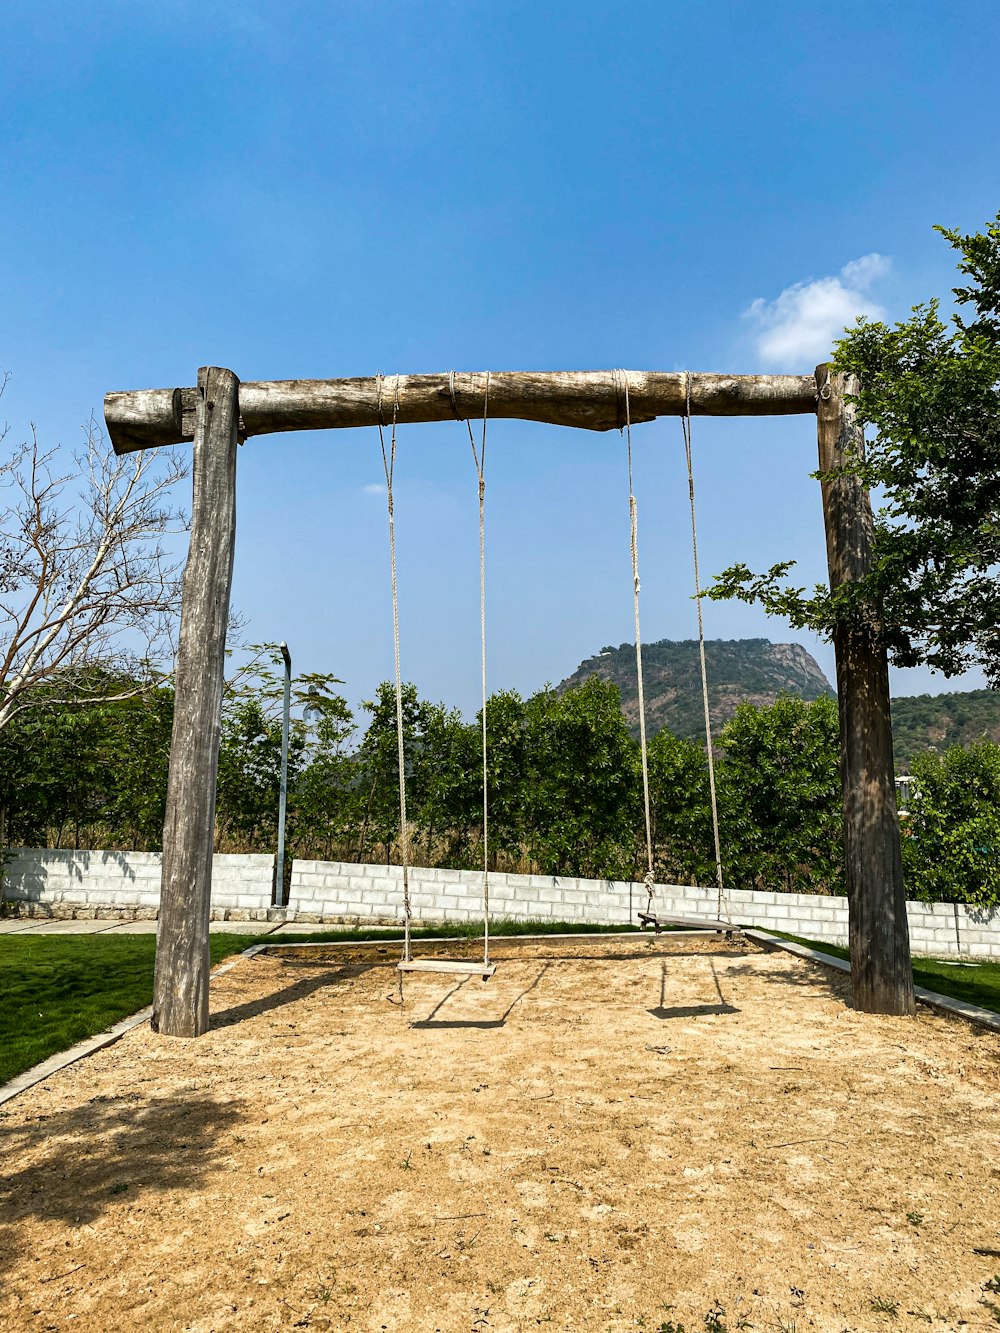 a wooden swing set in the middle of a field